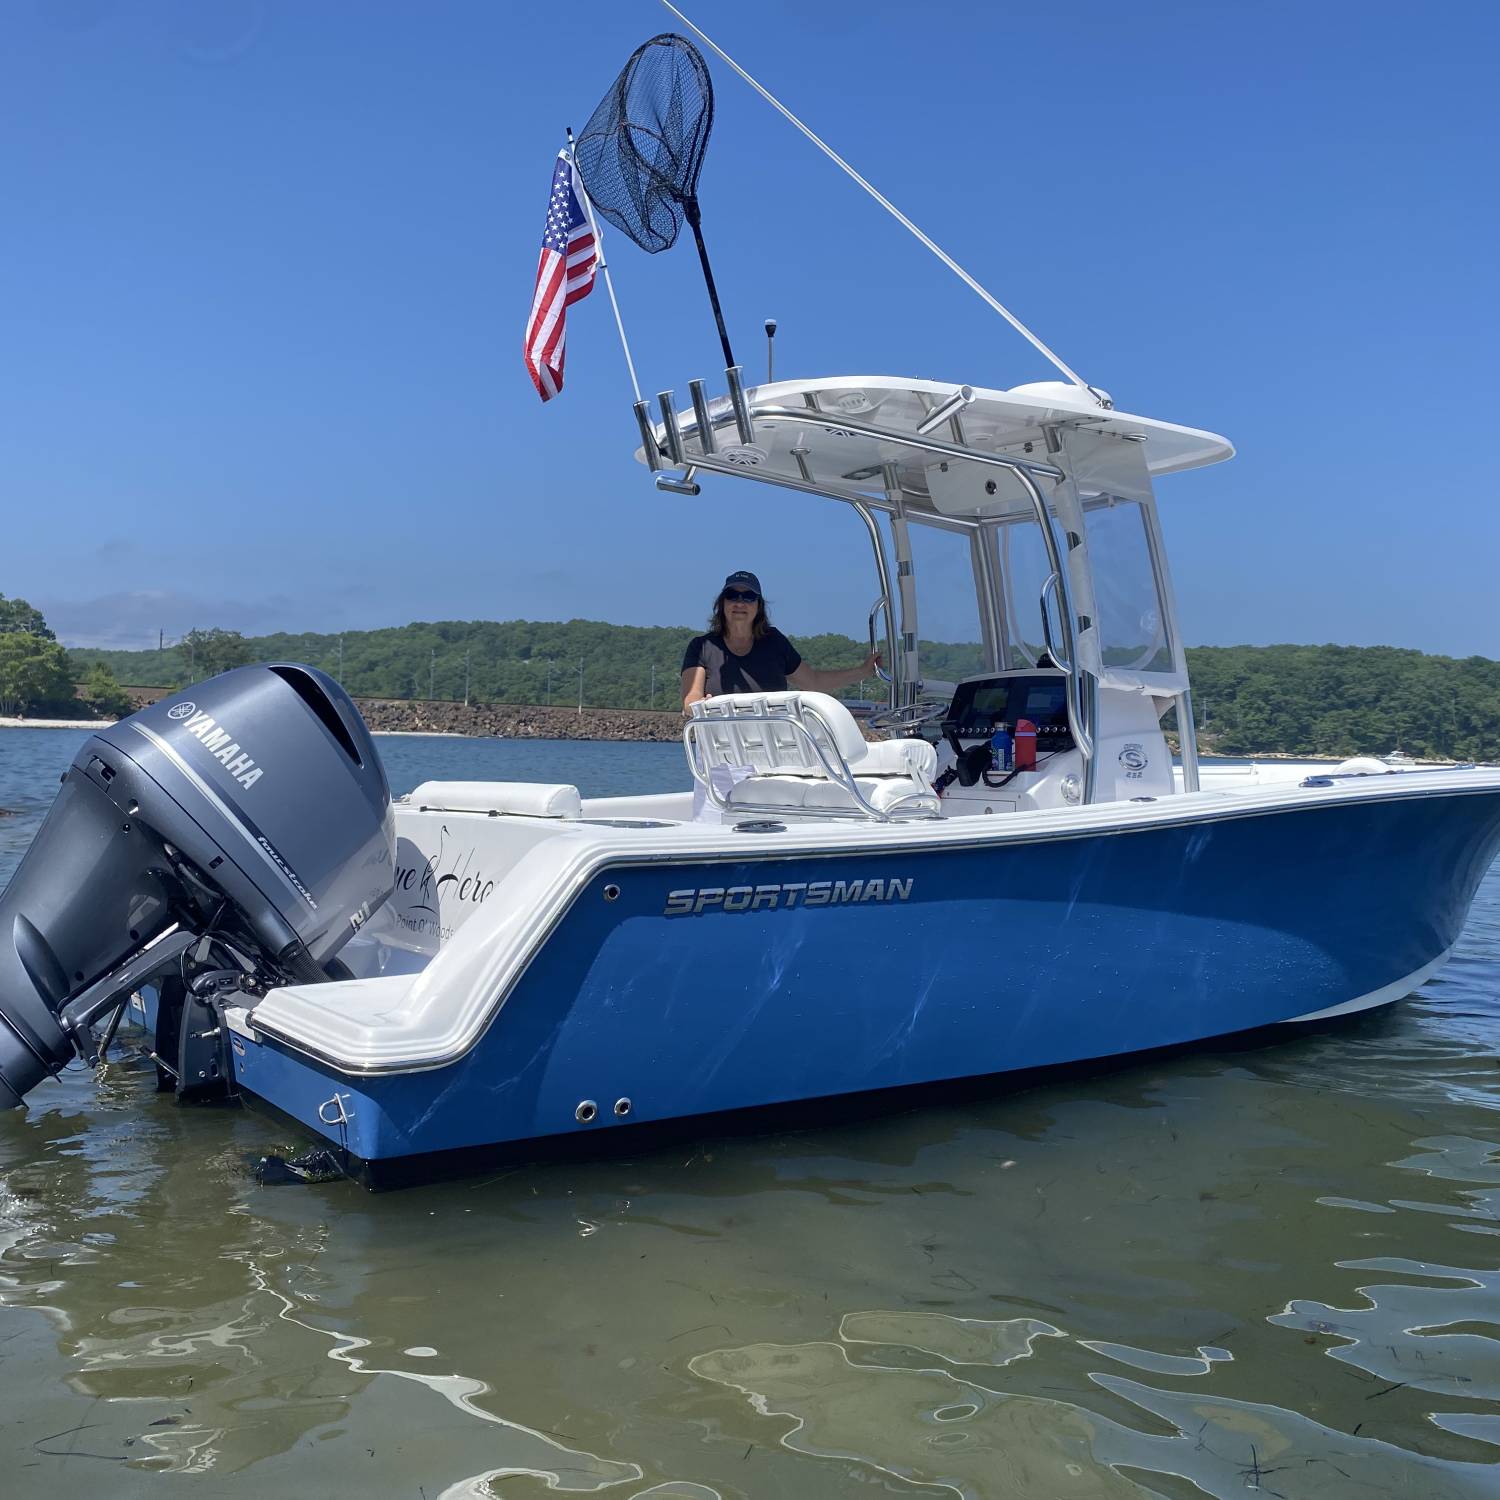 Title: Beaching - On board their Sportsman Open 232 Center Console - Location: Old Lyme Ct. Participating in the Photo Contest #SportsmanAugust2023